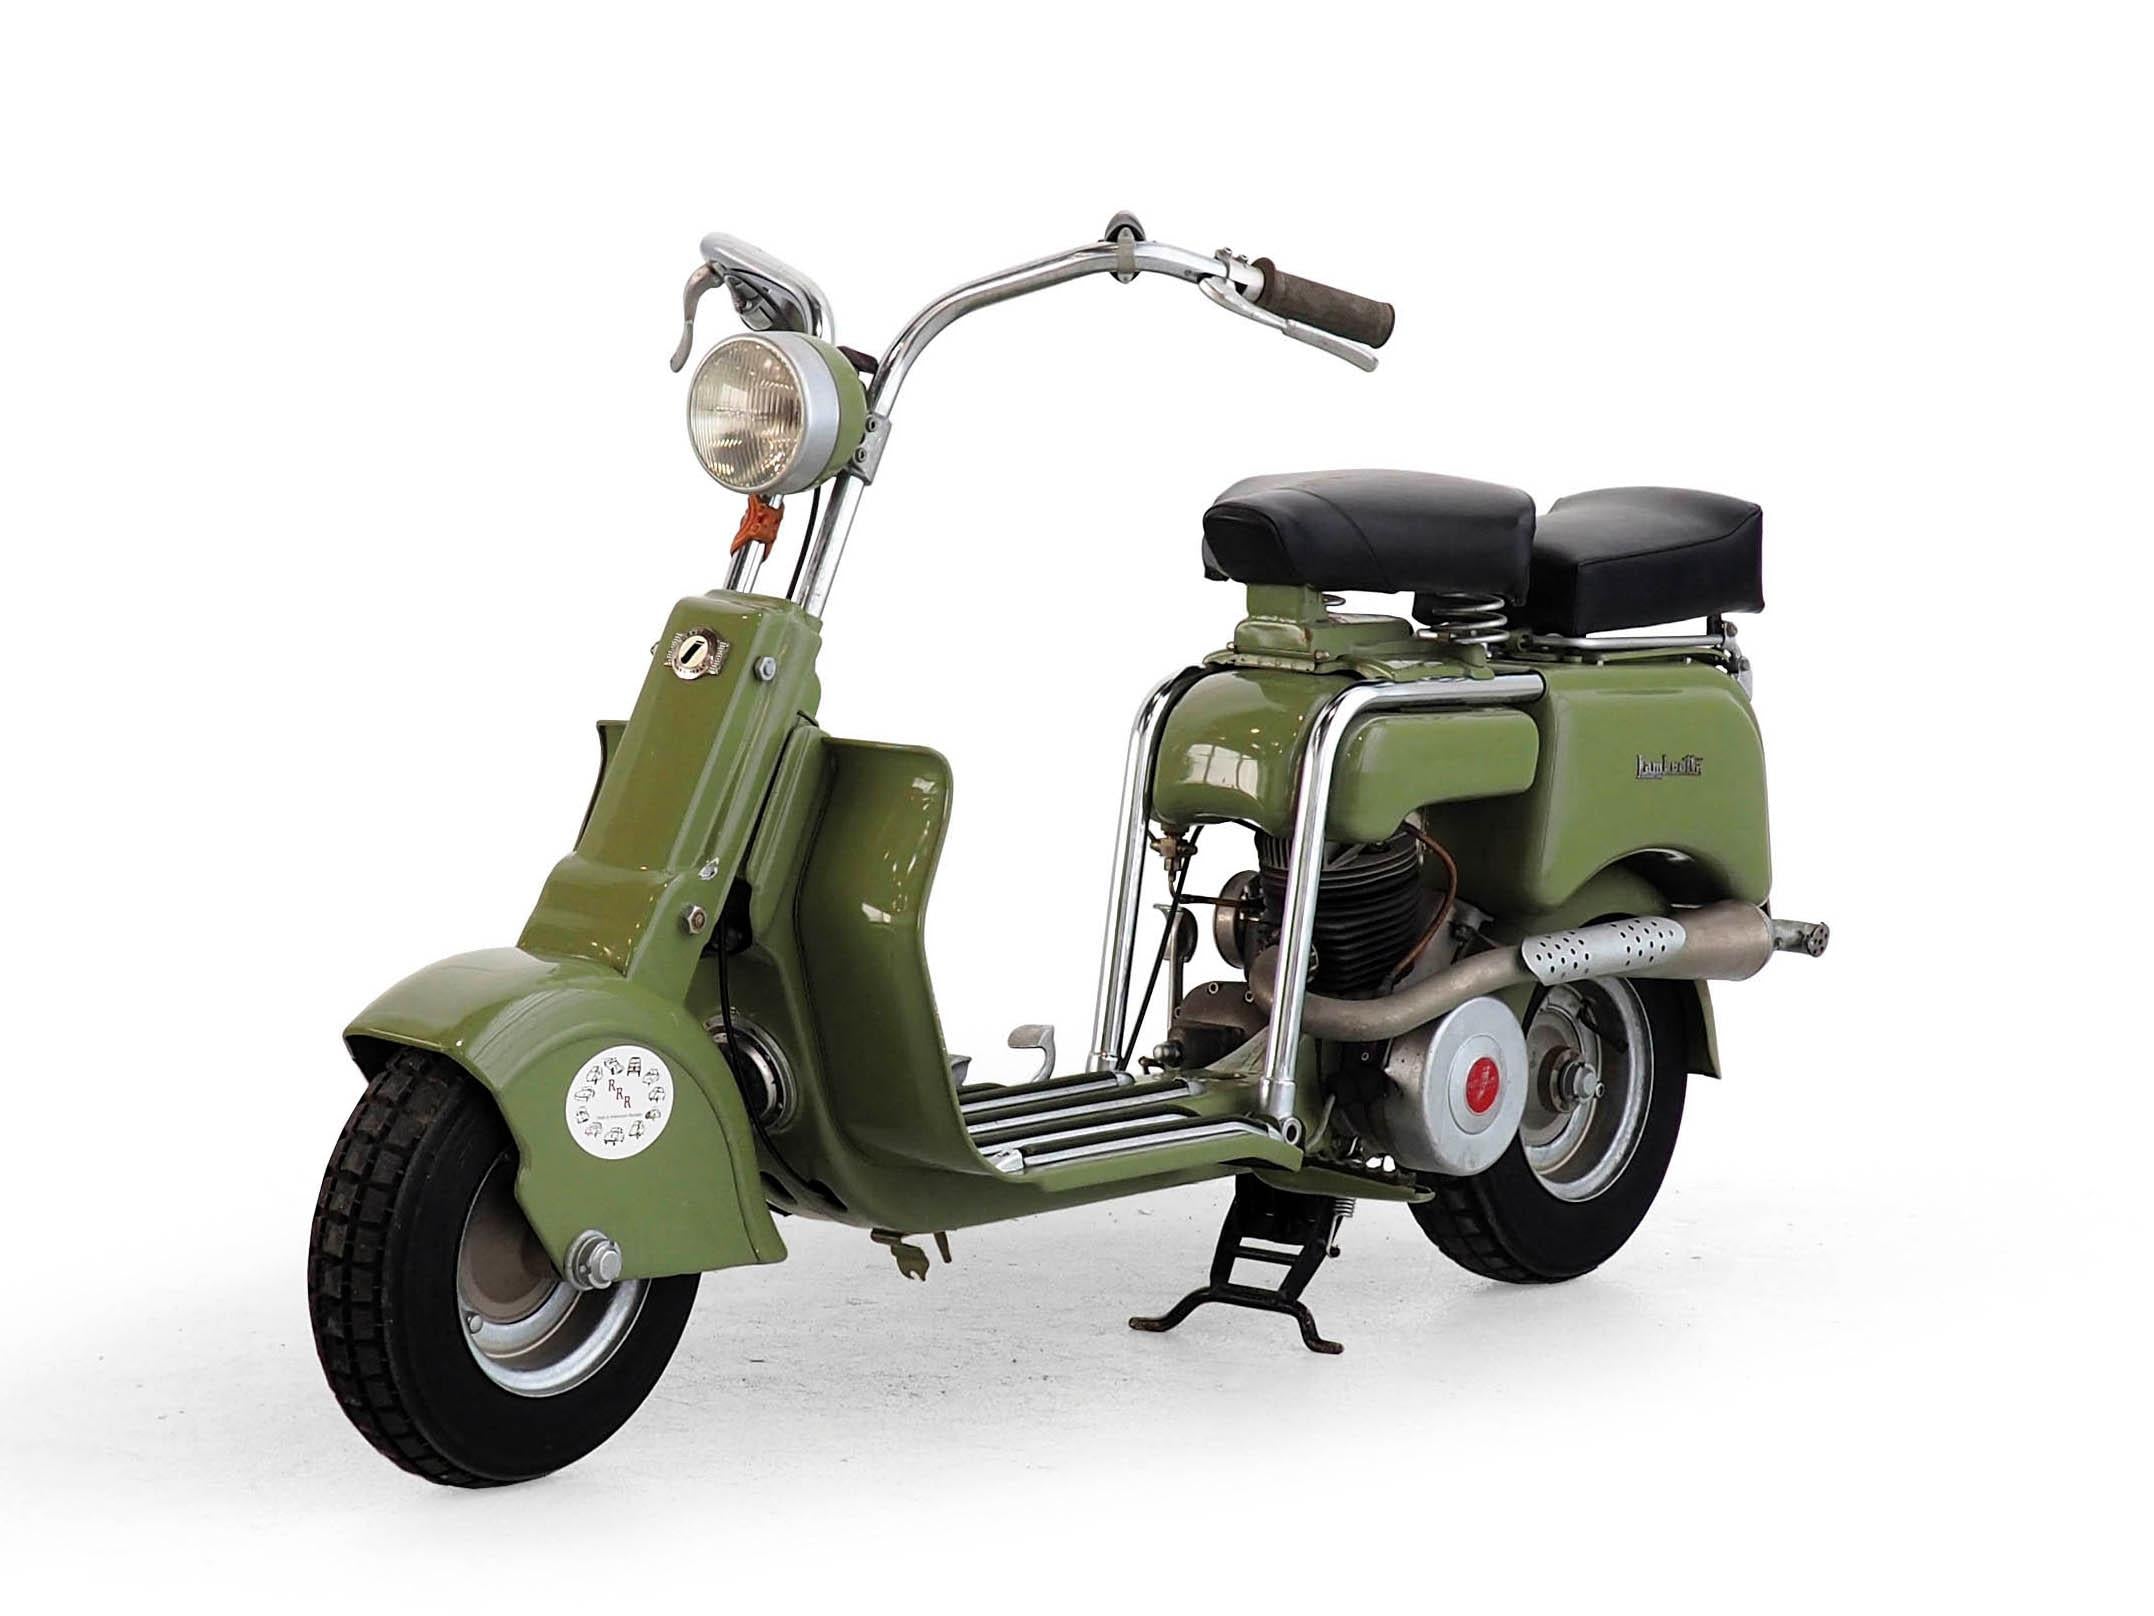 A Brief History of Lambretta: How the Iconic Scooter Was Born